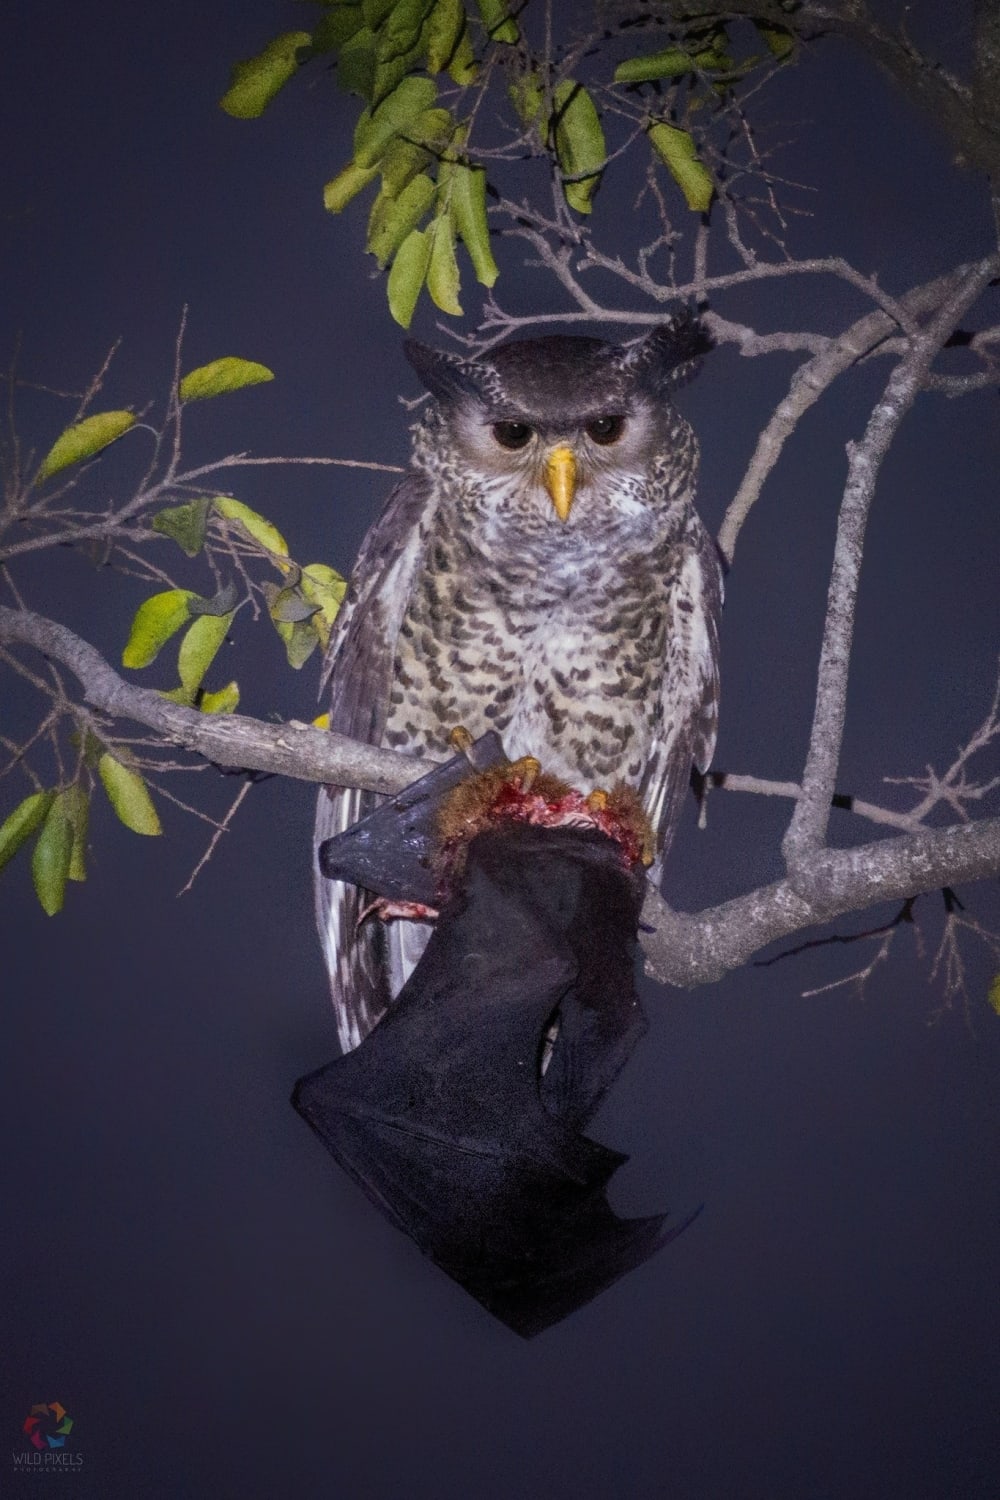 A Spot-bellied or Forest Eagle-owl, which is sometimes referred to as the "Devil Bird" & is a bold, vicious yet little-known top predator, shortly after killing an Indian Flying Fox, possibly the world's heaviest bat.